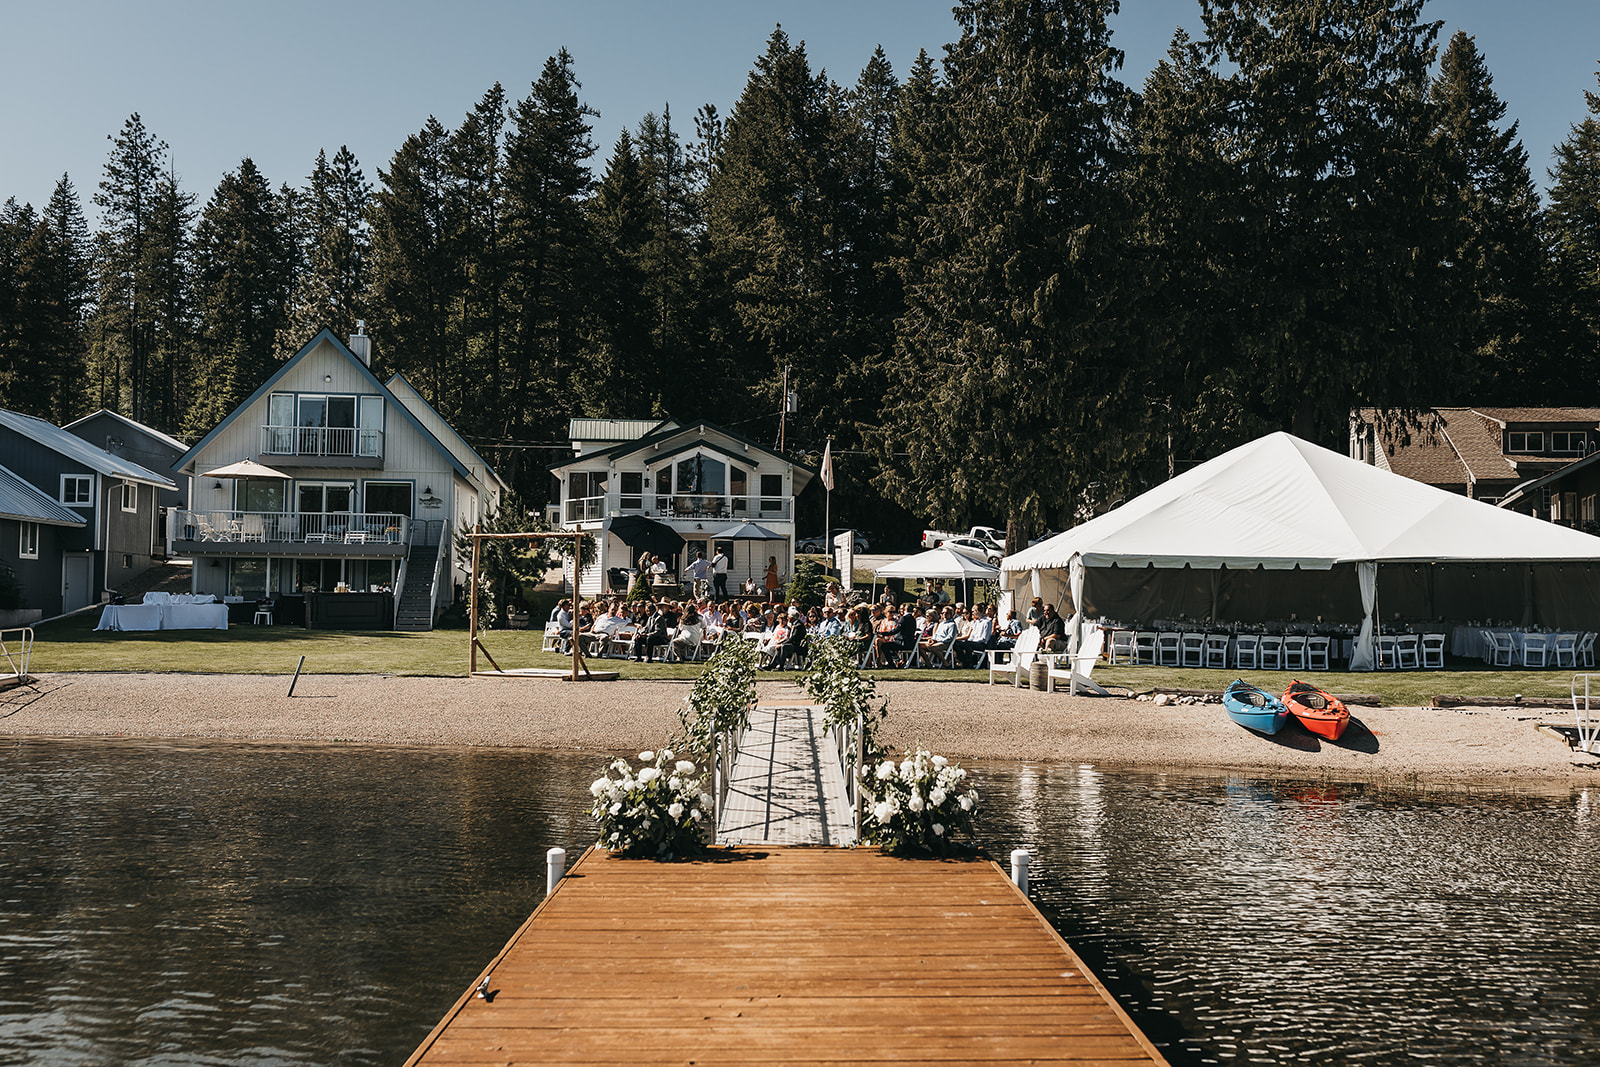 Lake front wedding ceremony at a private family lake house with private dock.